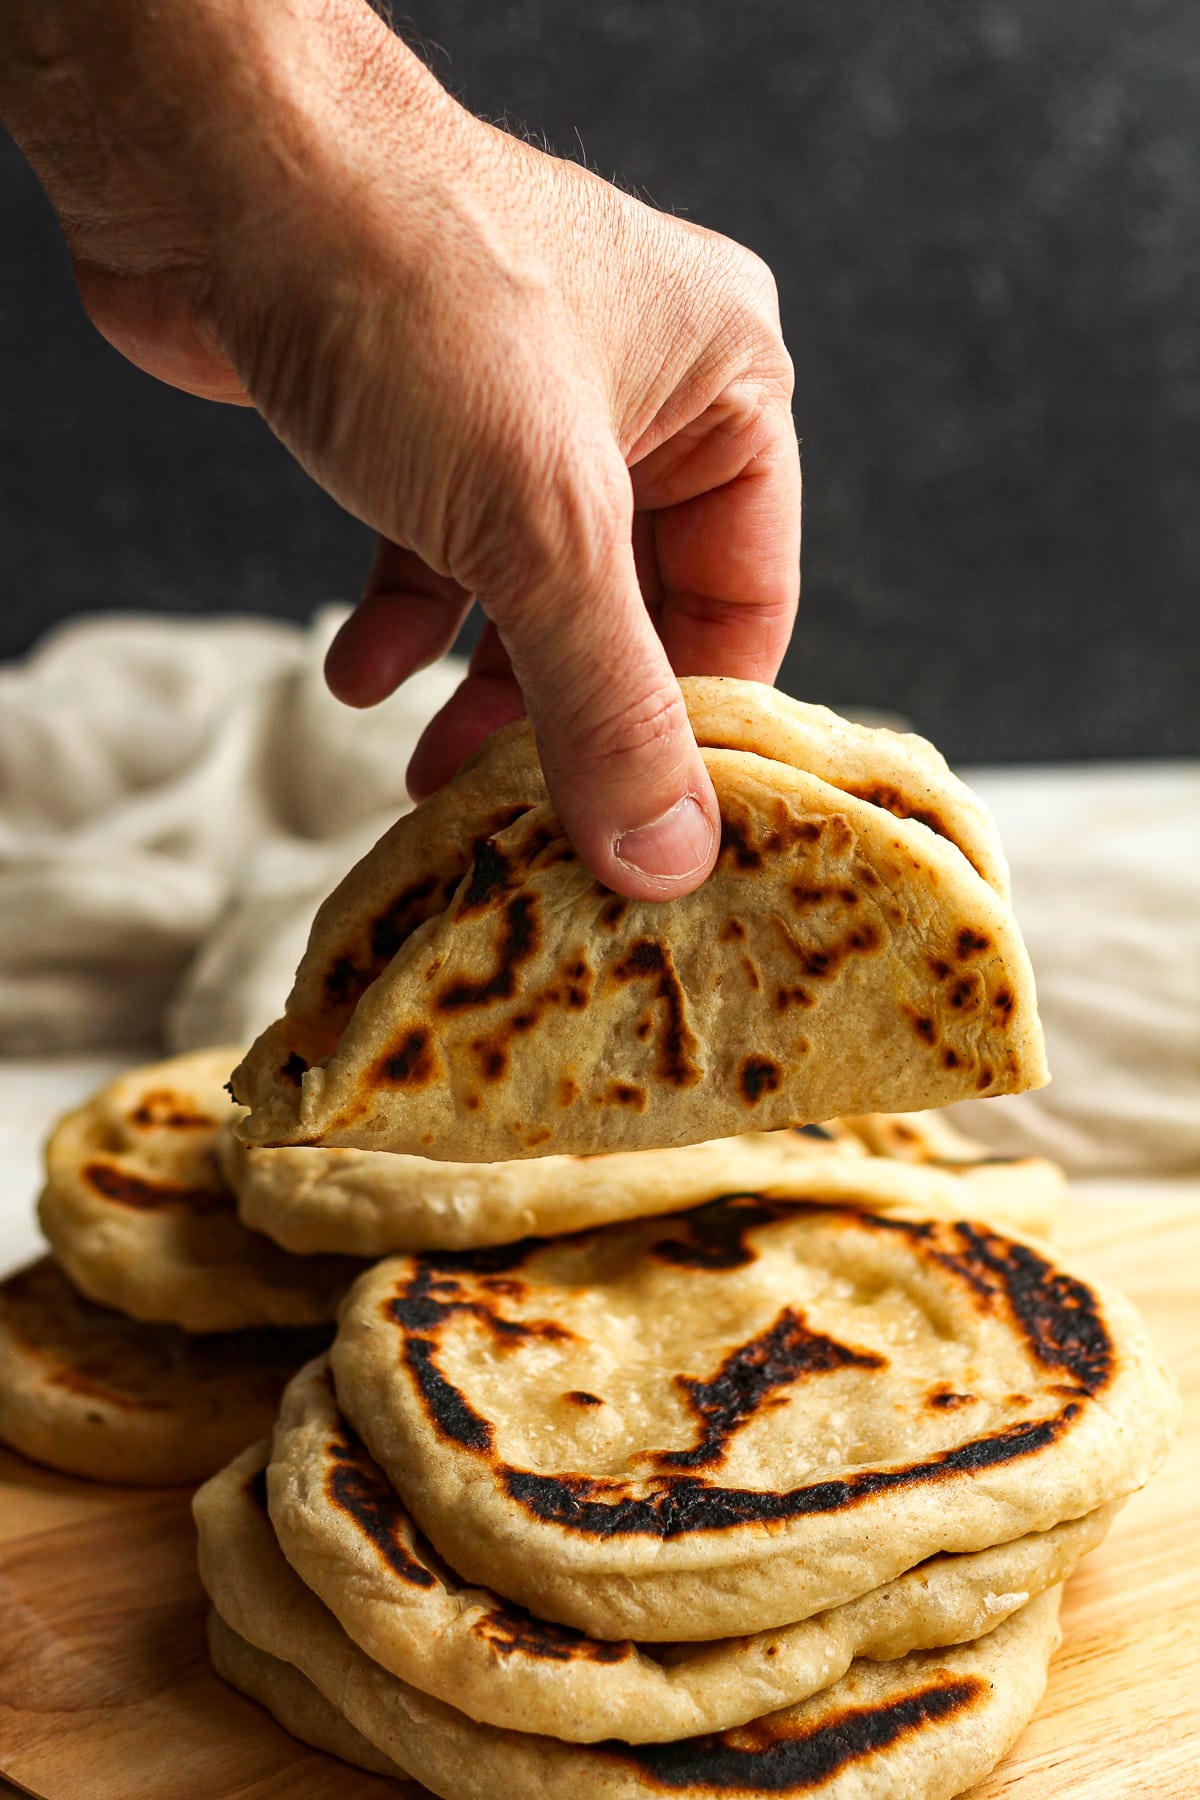 A hand holding a rolled up sourdough naan.